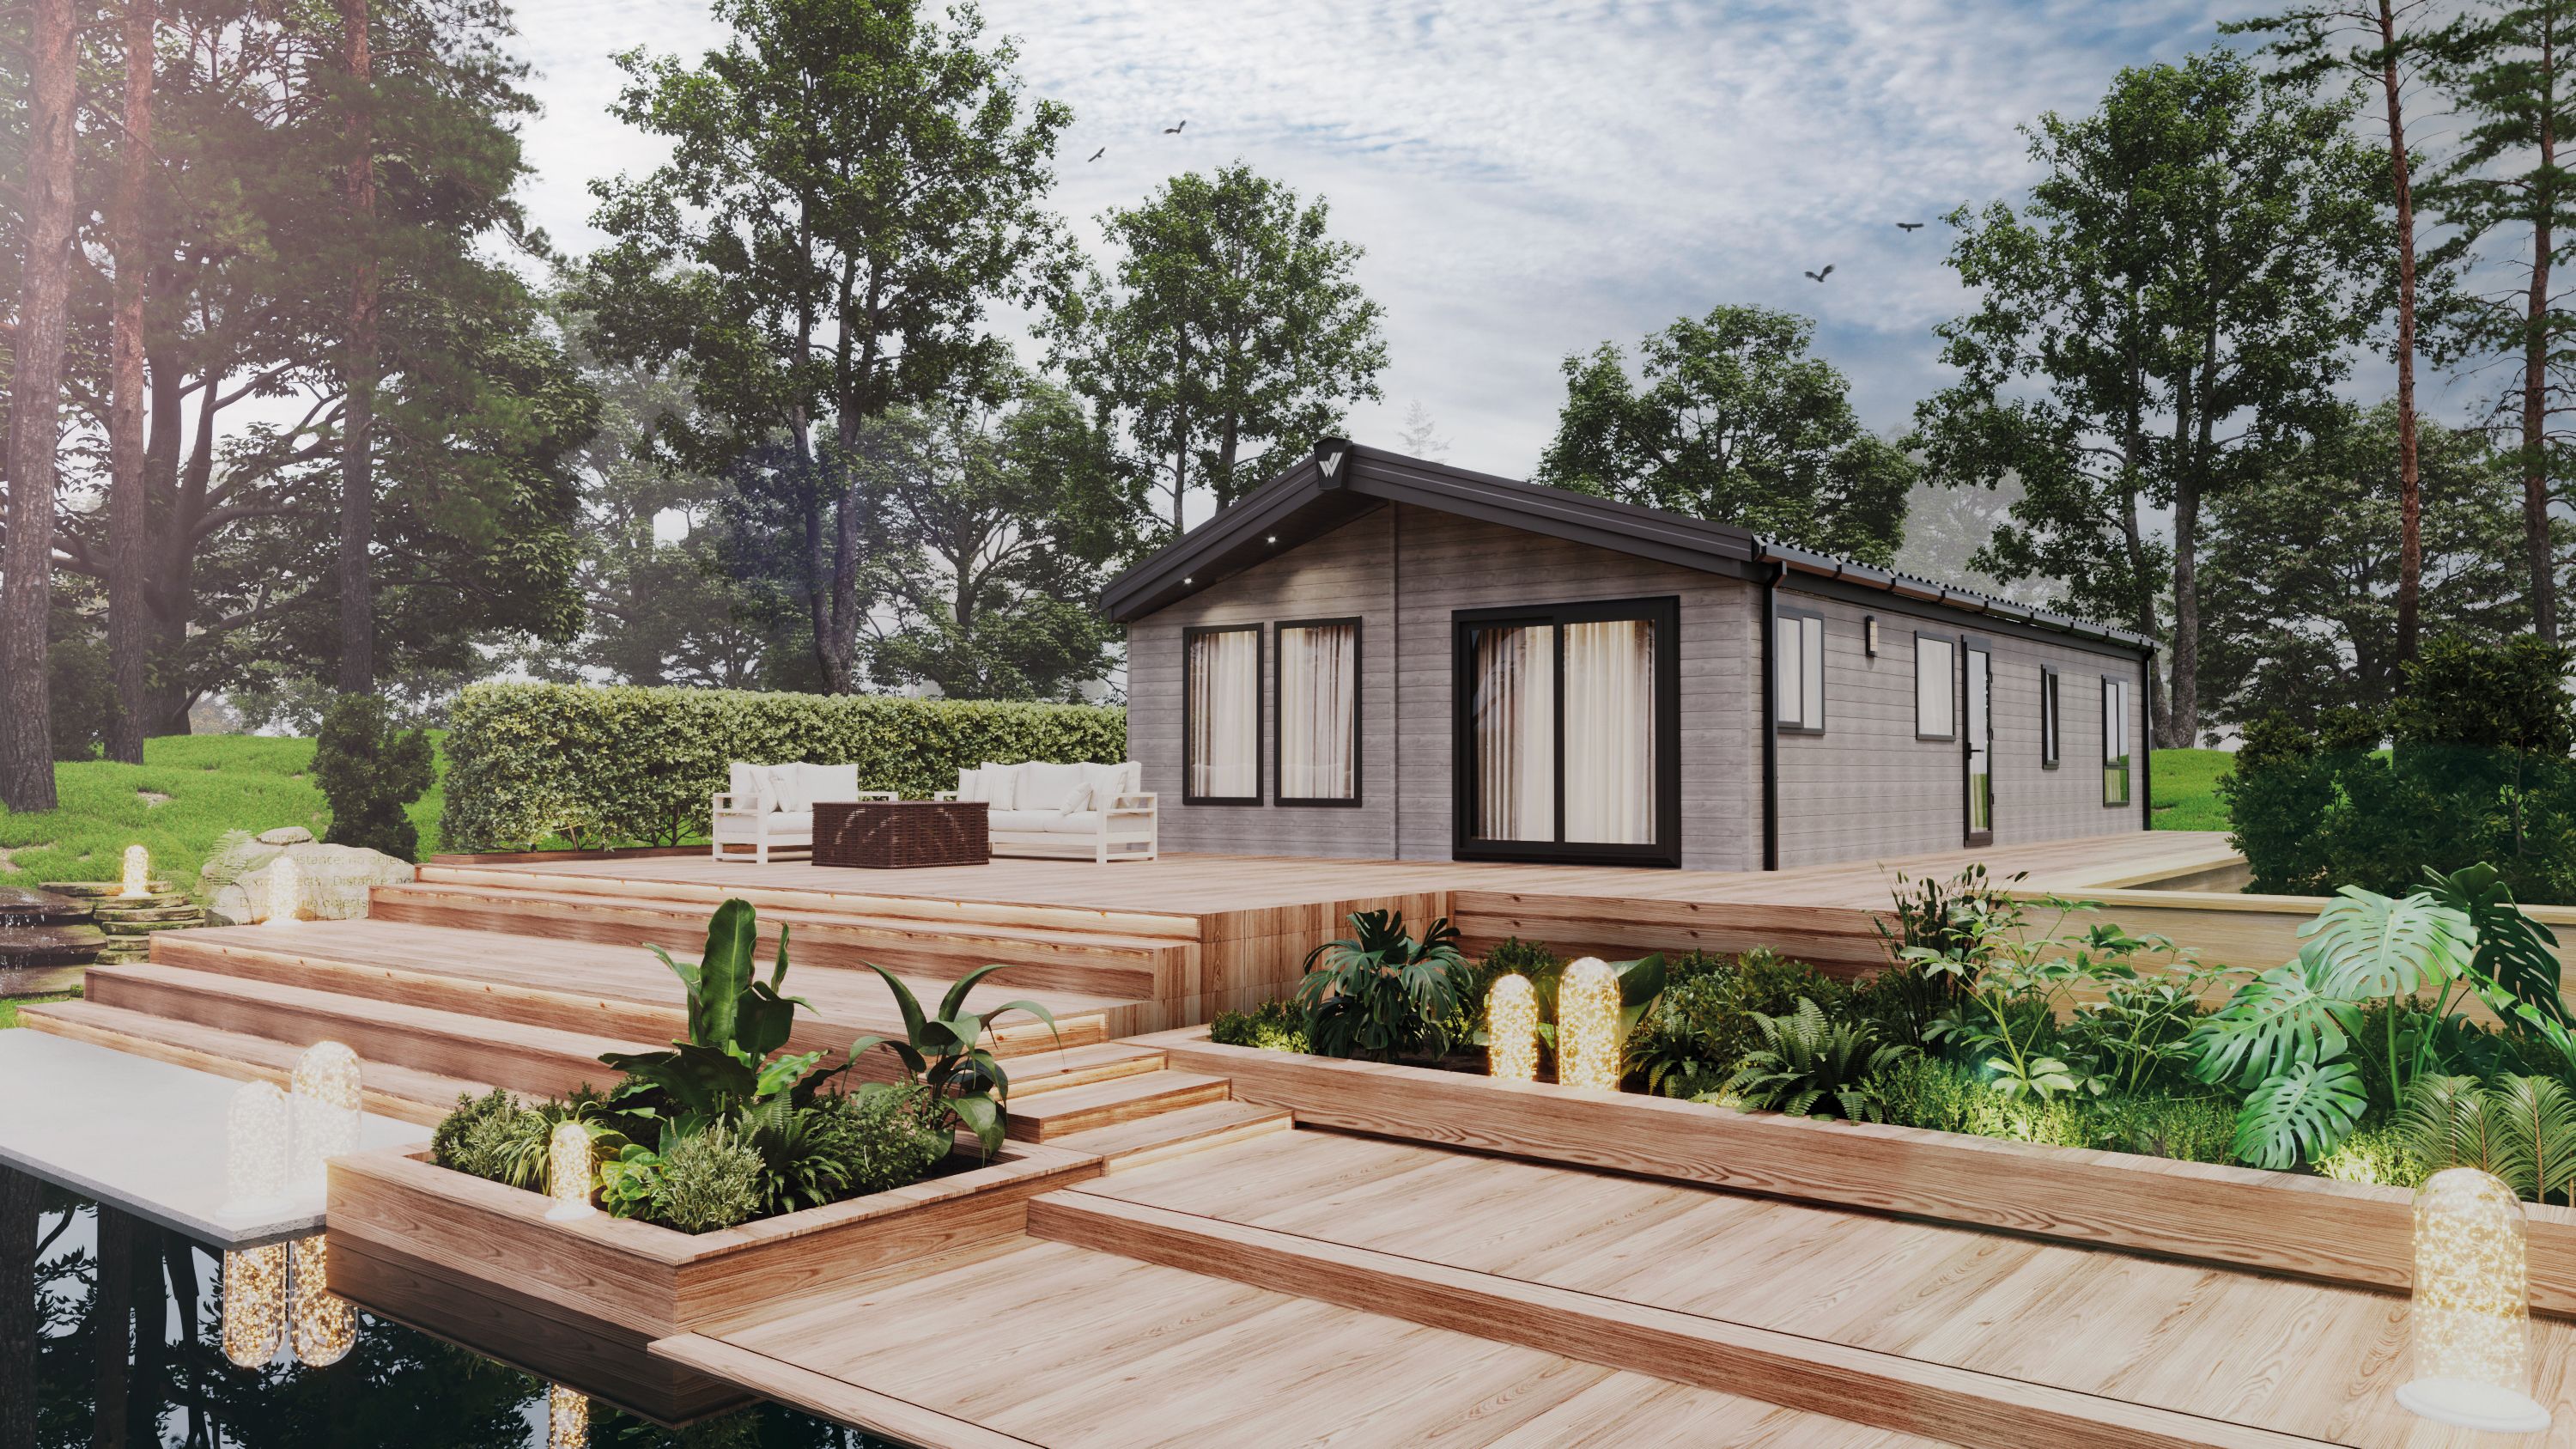 The Willerby New Holland holiday lodge surrounded by trees and plants. There is multi-level decking in front with water features. 